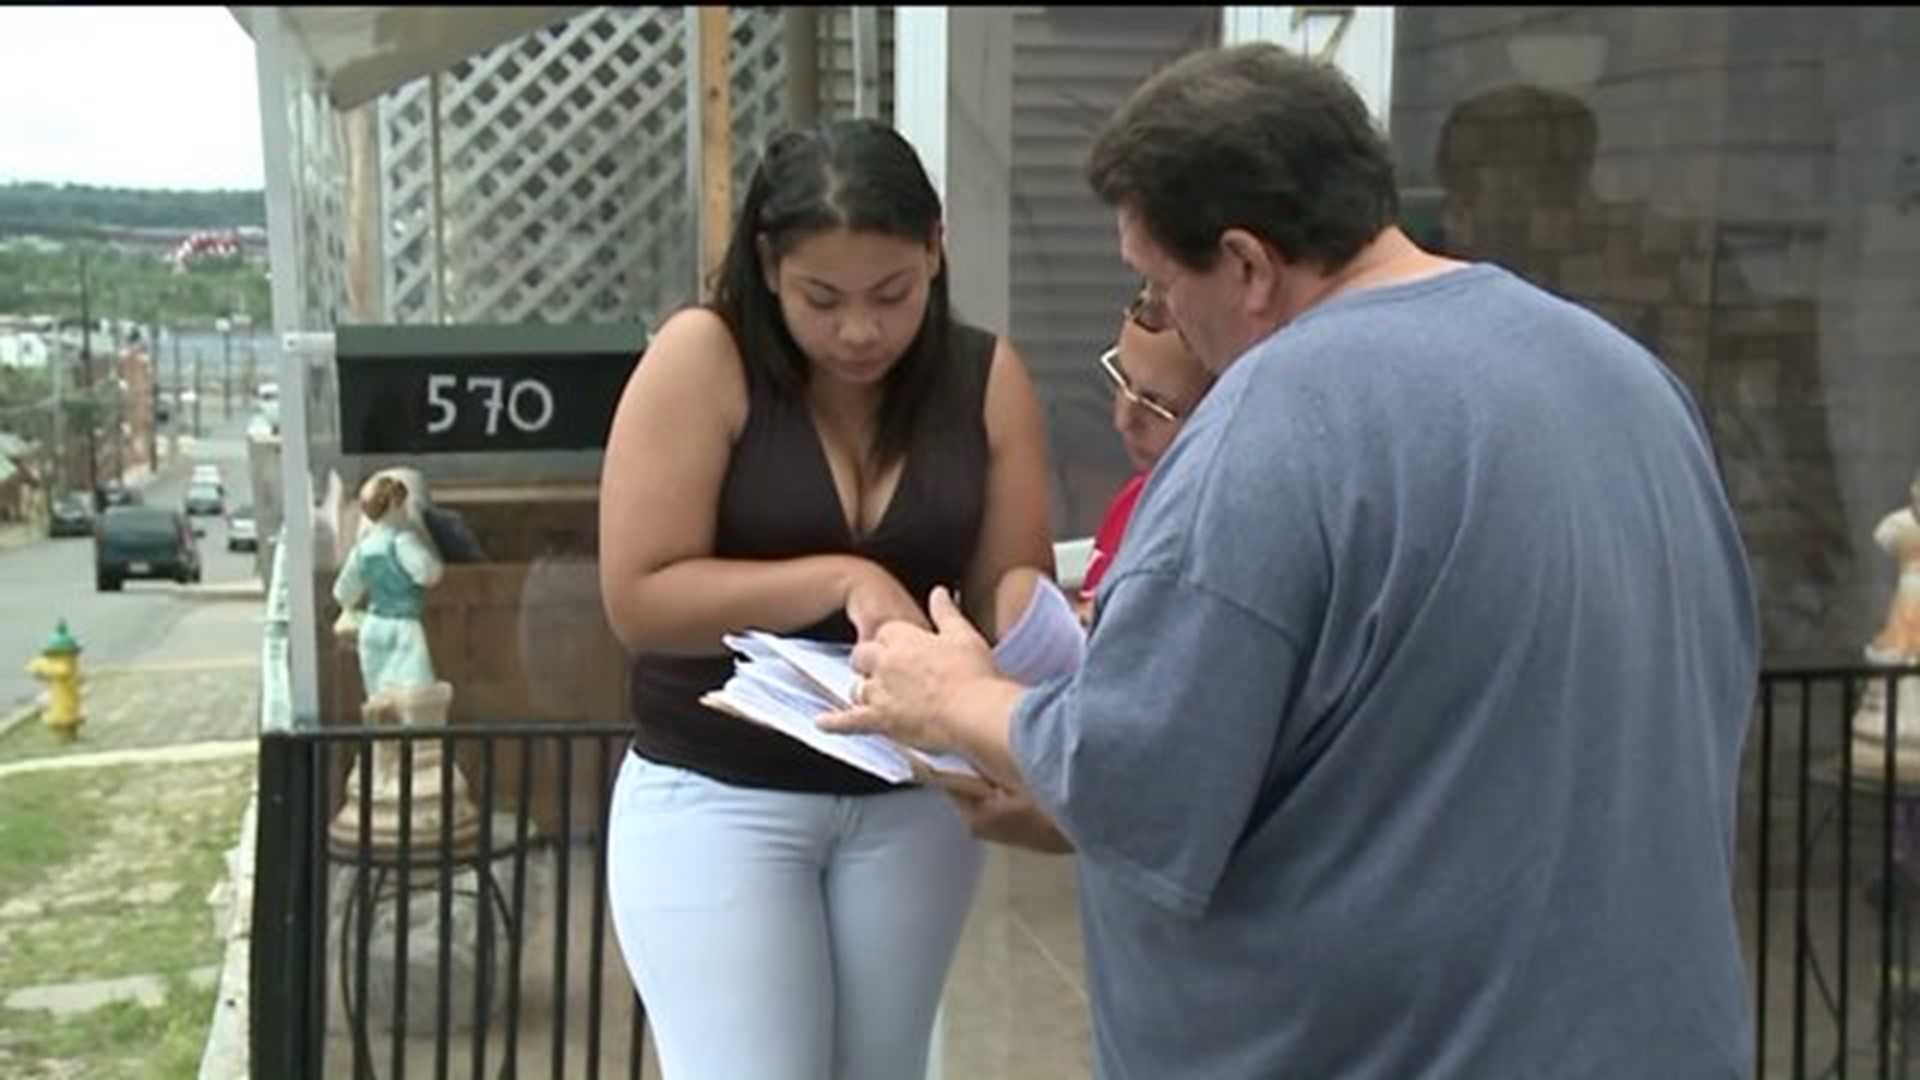 Alleged Real Estate Fraud Victims Look for Help